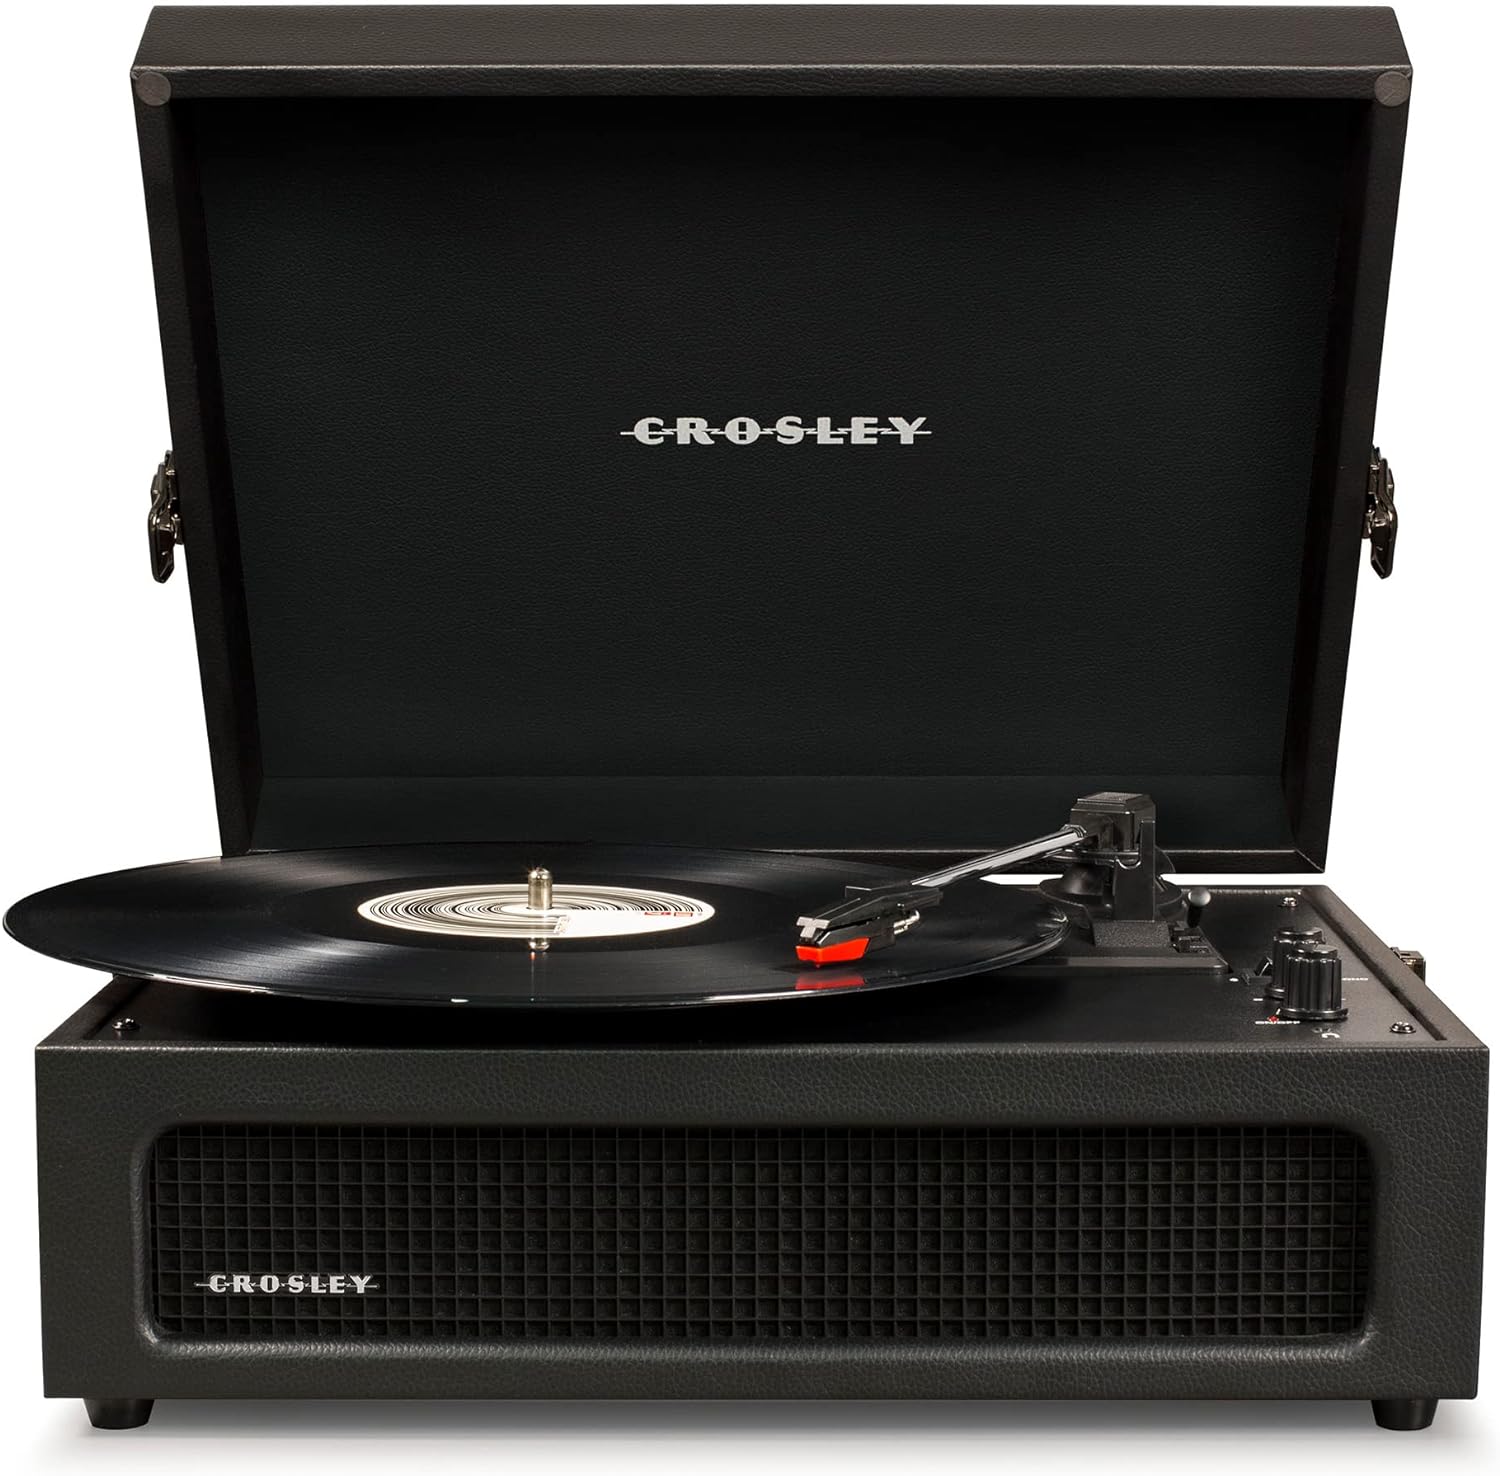 Clearance Crosley Voyager Portable Retro vinyl record player turntable with bluetooth – Black